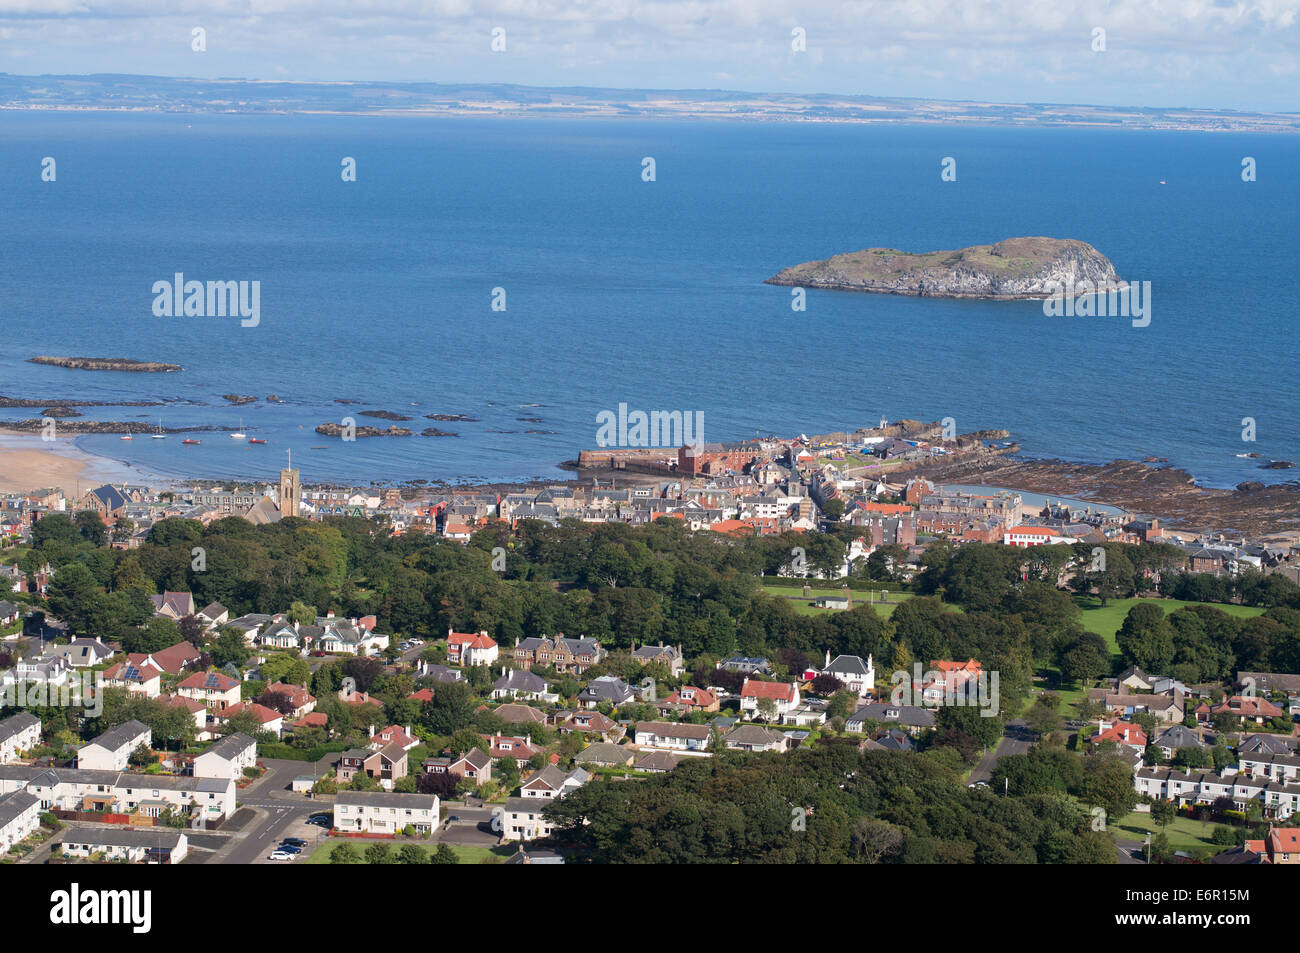 View of North Berwick and Craigleith island from Berwick Law, East Lothian, Scotland, Europe Stock Photo